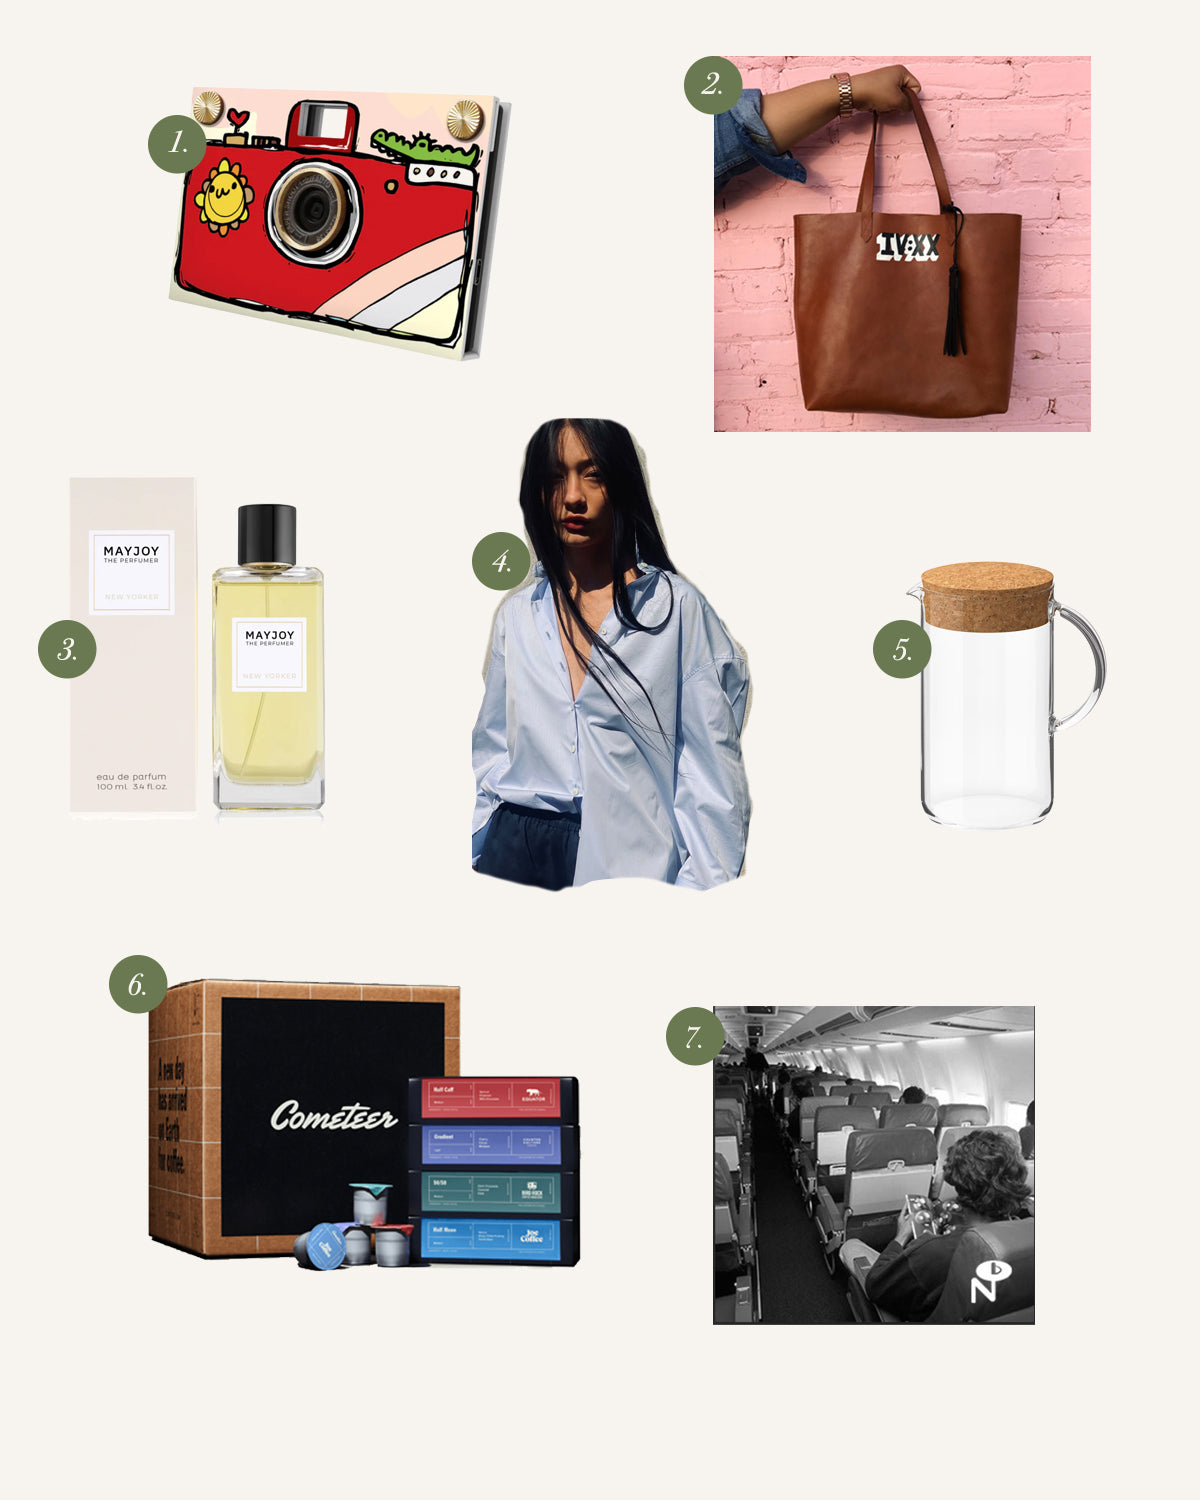 An image mood board for March 2023 comprised of a camera for kids, a leather bag, perfume, a blue shirt, a glass pitcher, a coffee subscription box, and a playlist.